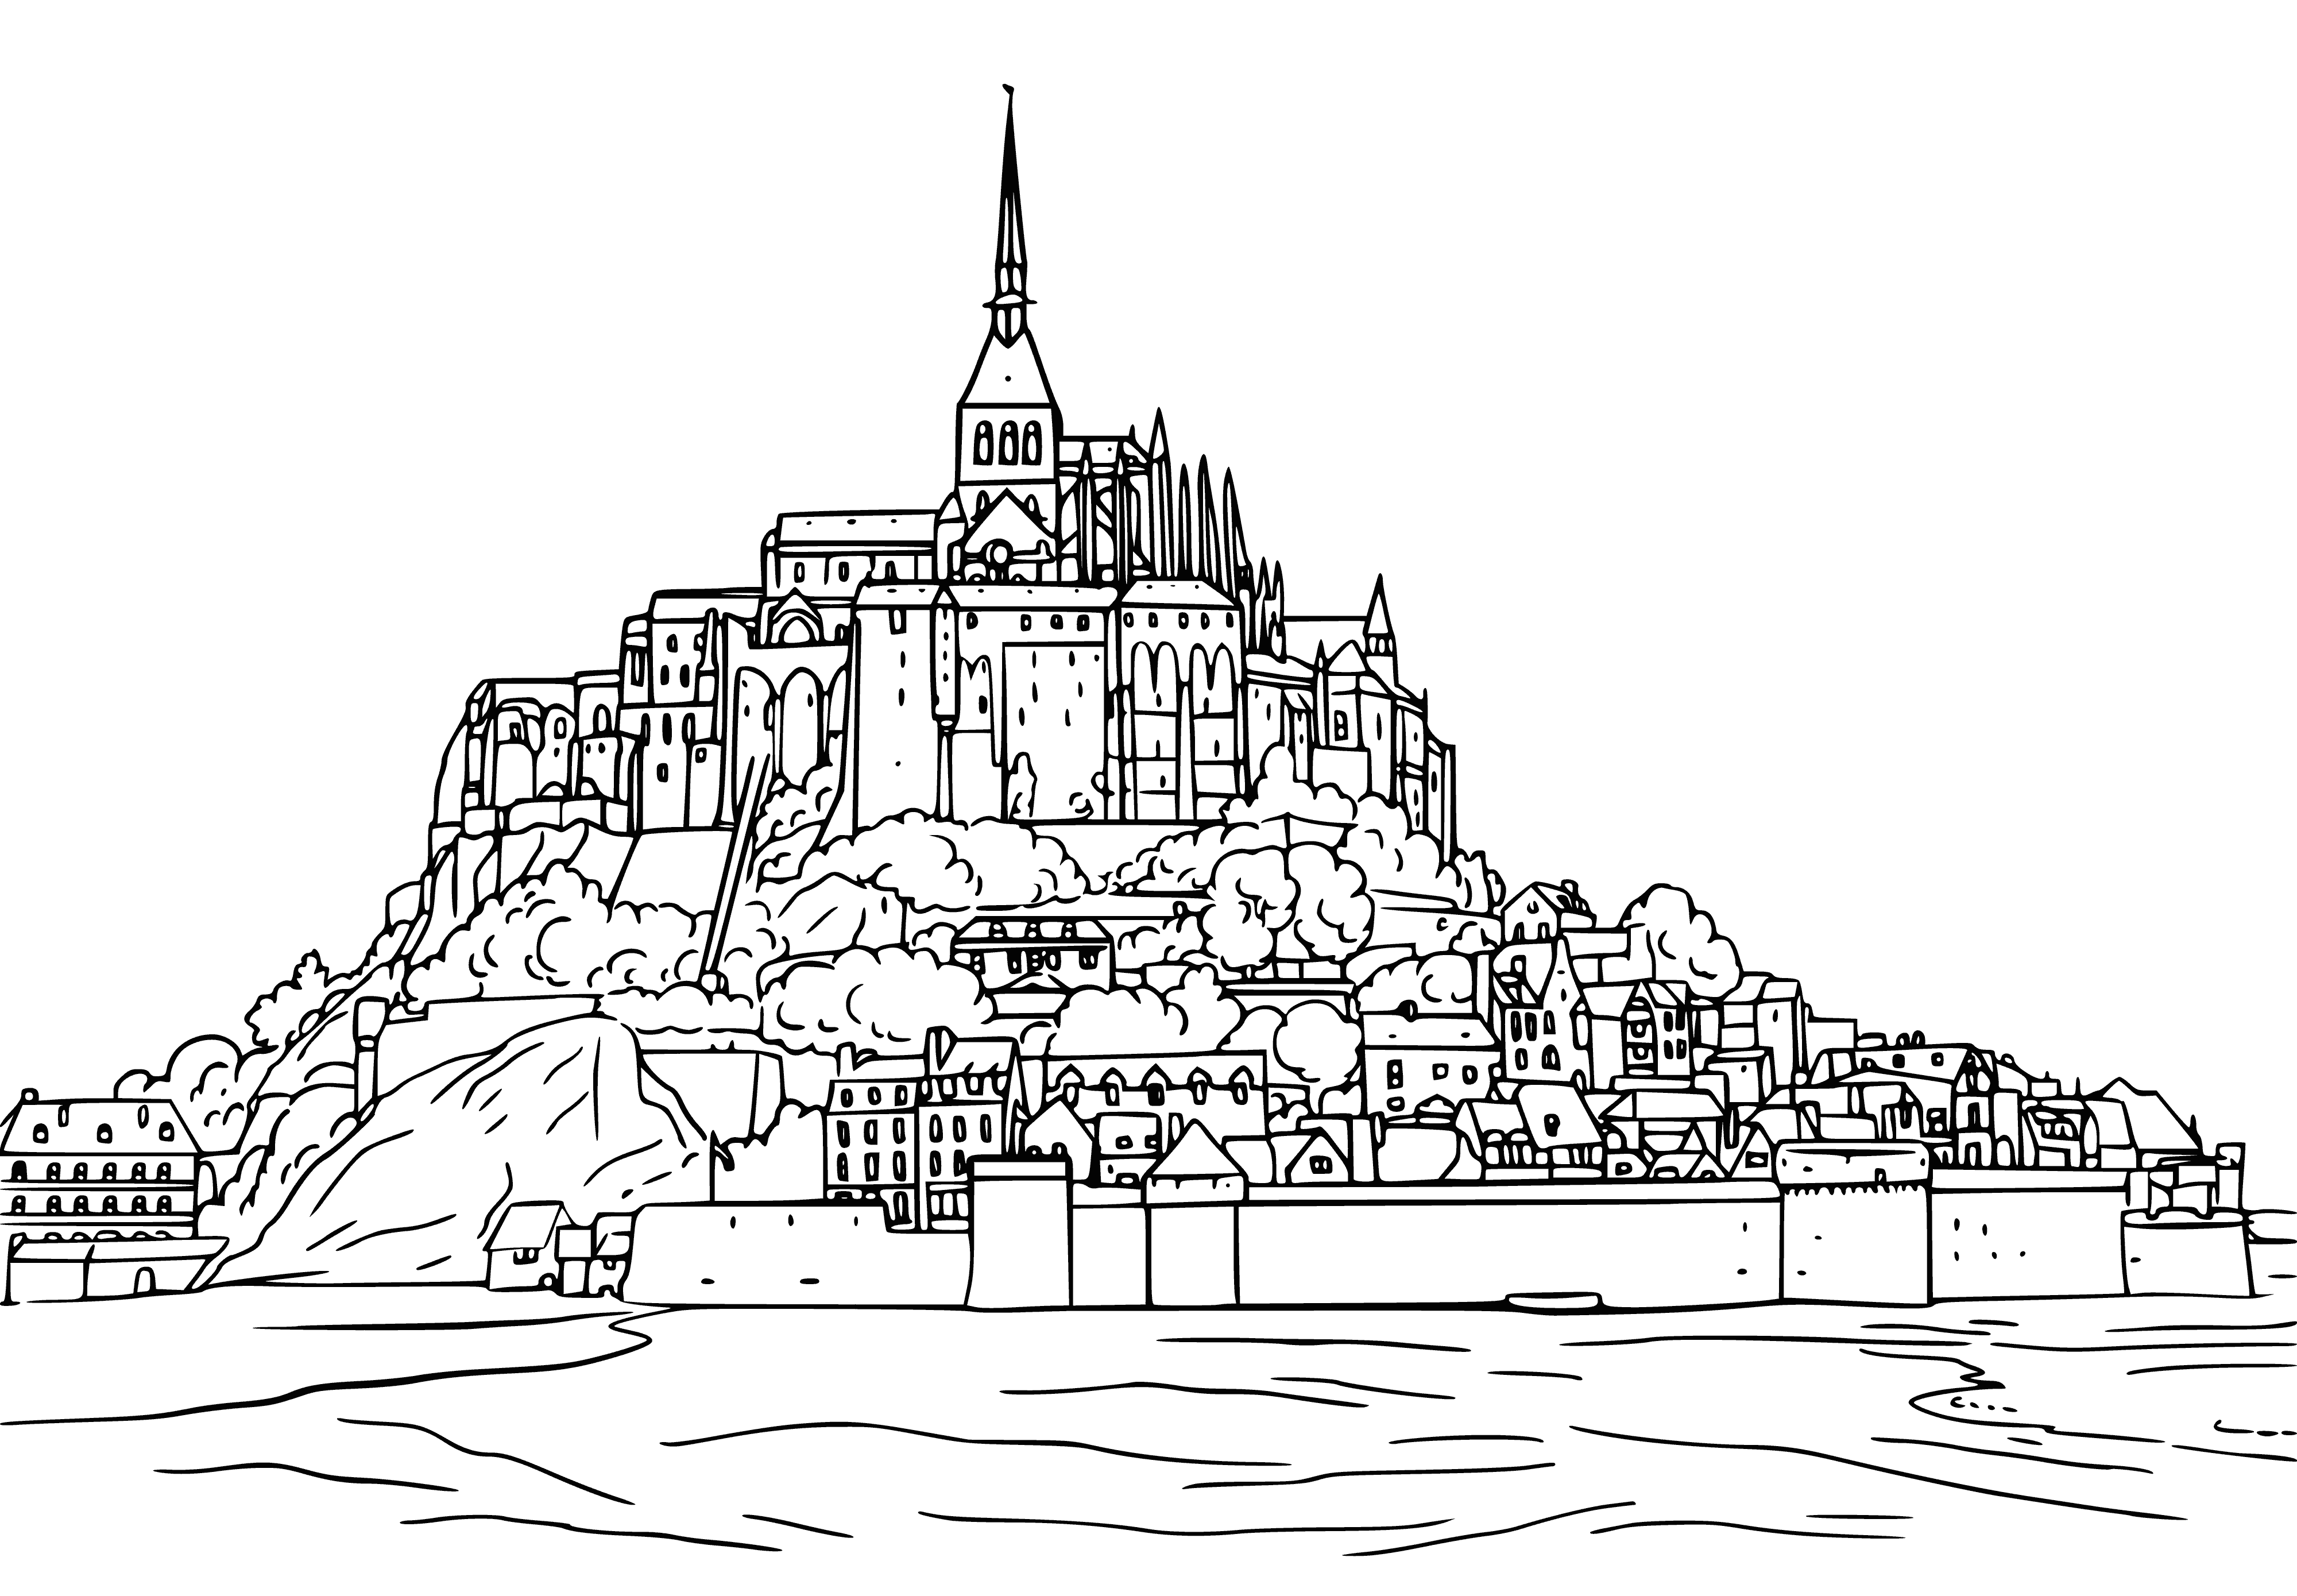 coloring page: Coloring page of rocky mountain w/ small village at its base, surrounded by water w/ small bridge to mainland. Clear, sunny sky.